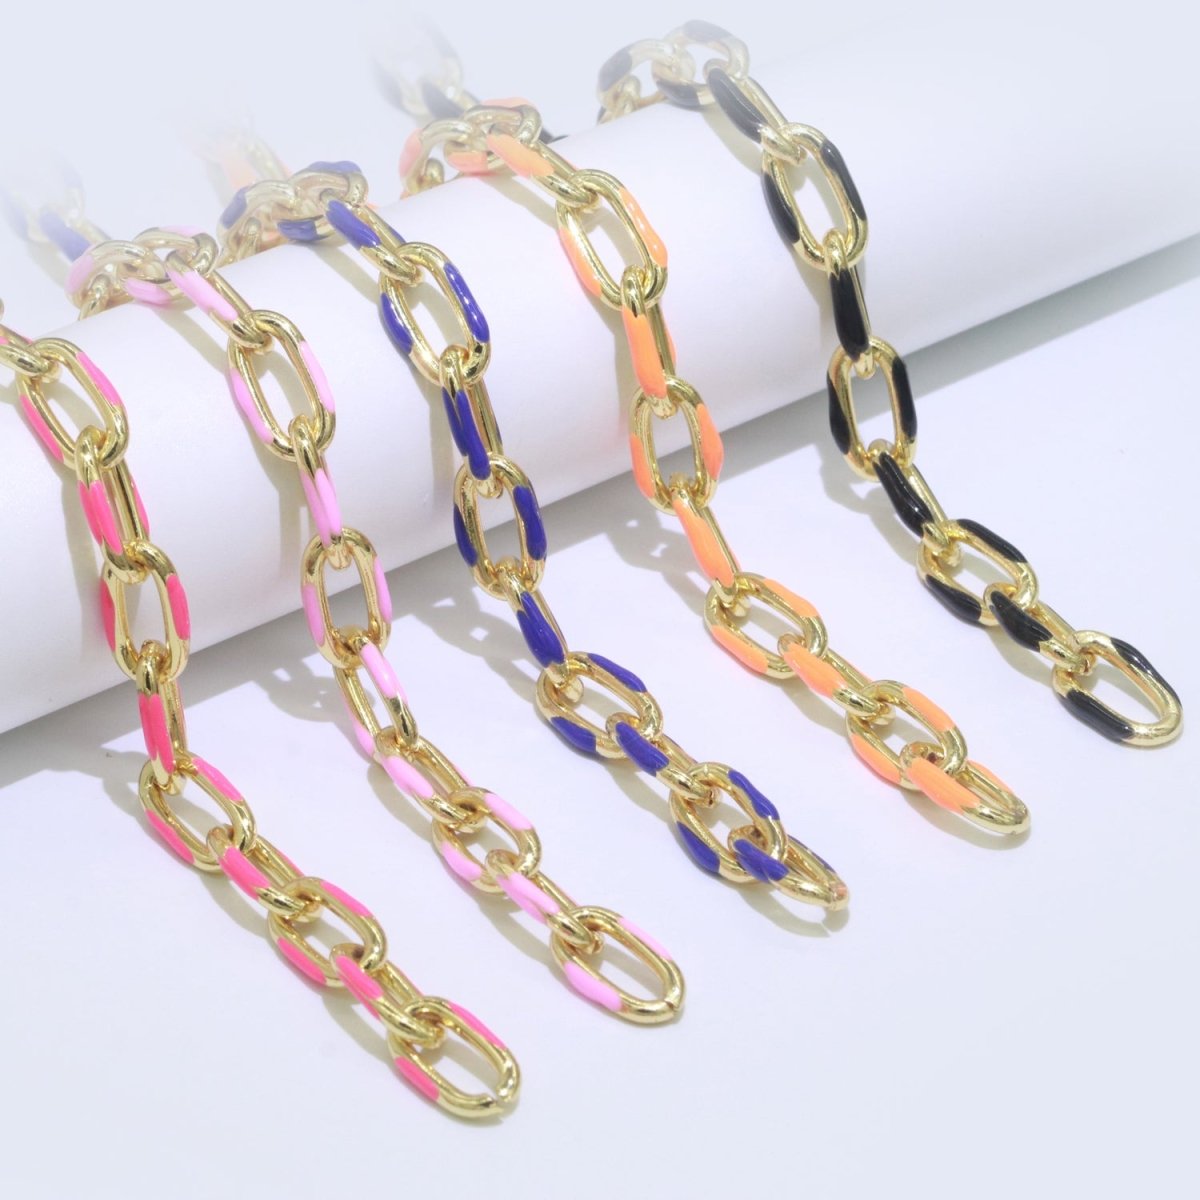 Chunky Gold Multi-Color Enamel CABLE Chain by Yard, Link Cable Thick Elongate Chain, Wholesale Bulk Roll Chain Jewelry | ROLL-517, ROLL-518, ROLL-519, ROLL-520, ROLL-521, ROLL-522, ROLL-523, ROLL-524, ROLL-525, ROLL-526 Clearance Pricing - DLUXCA